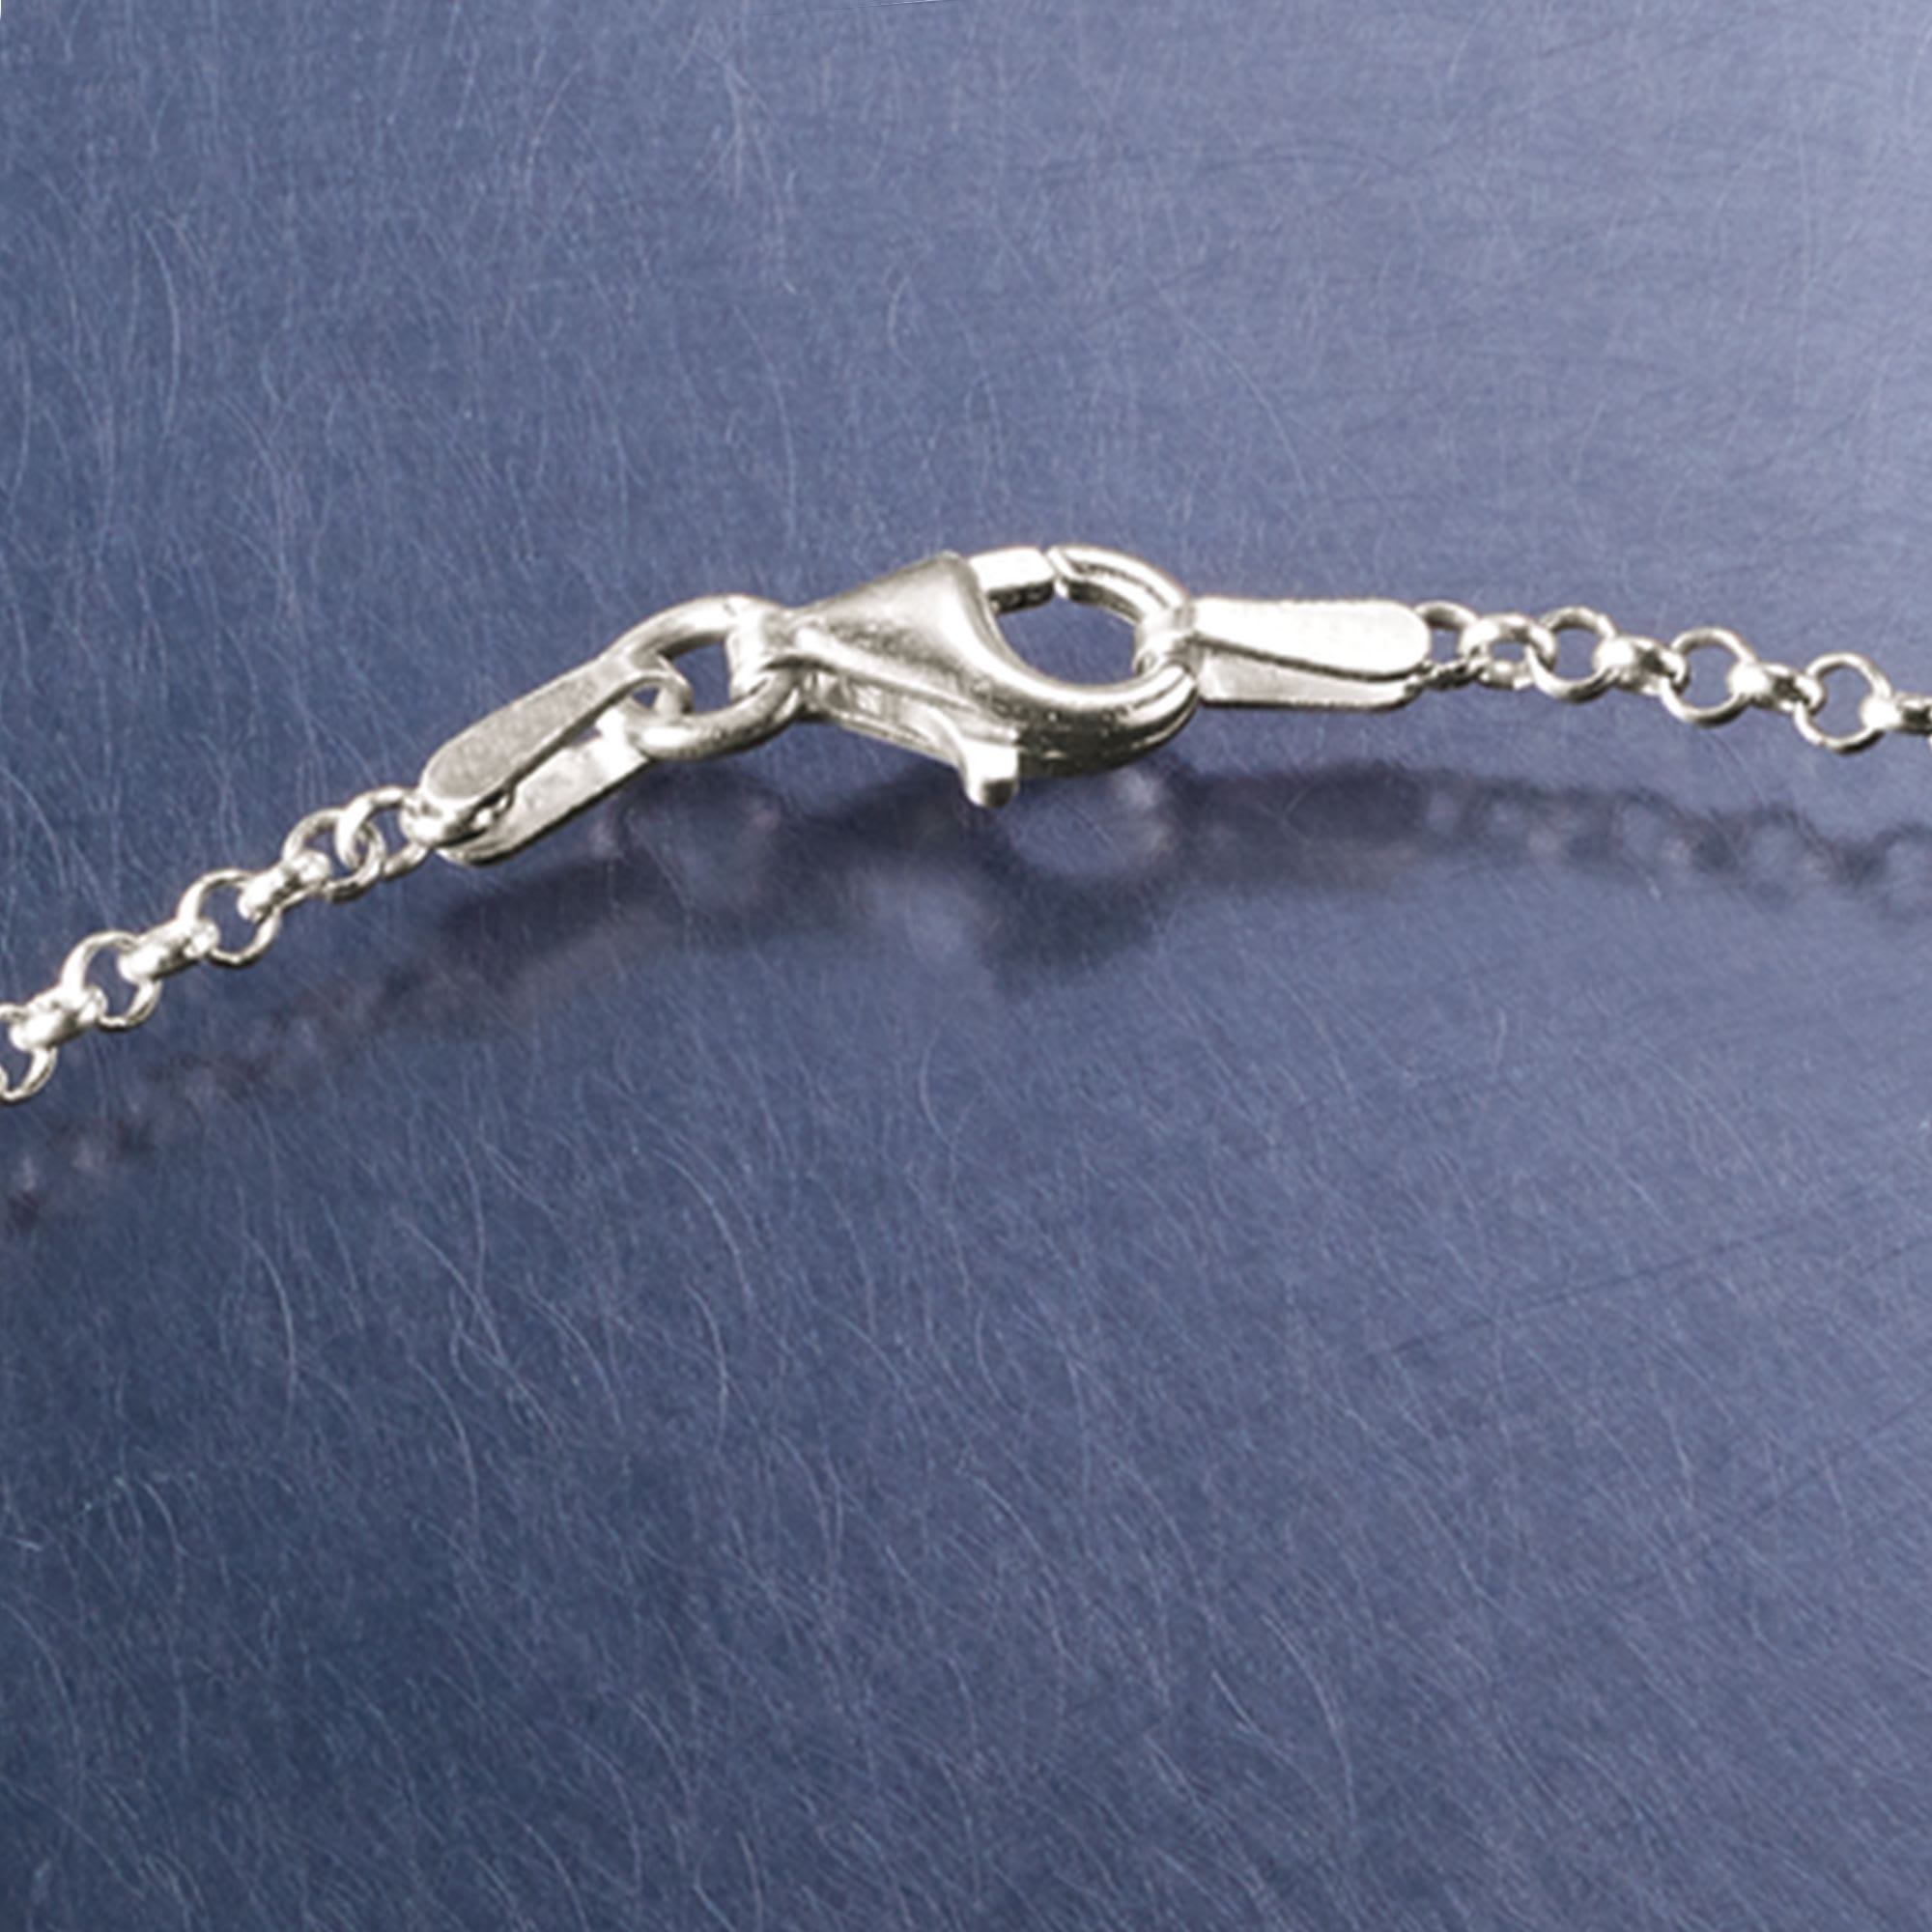 Monogram Sterling Silver Bracelet with Rollo Chain